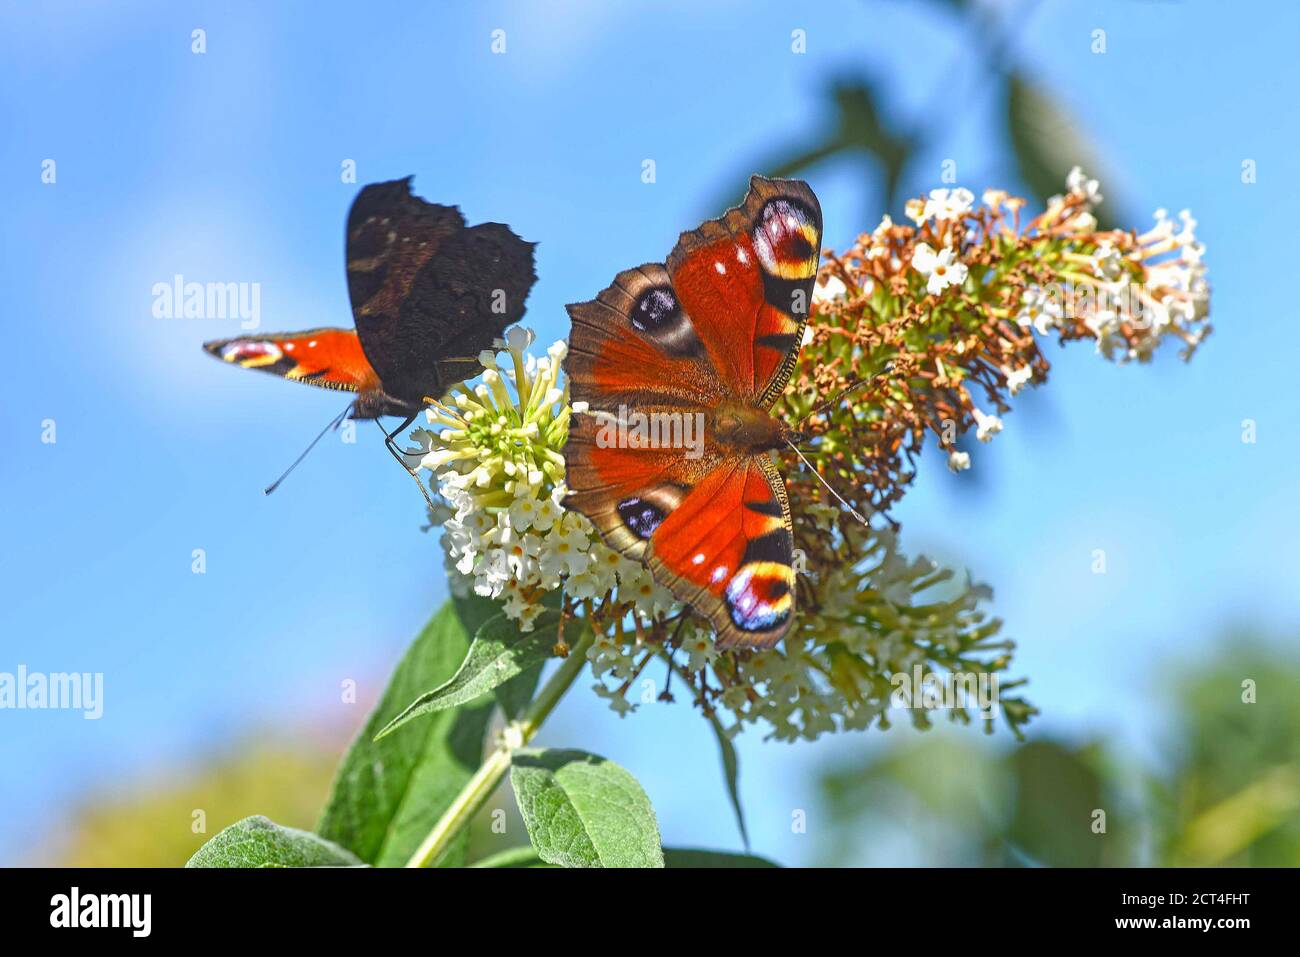 Peacock butterfly (Aglais io) feeding on white flowering summer butterfly bush. Stock Photo